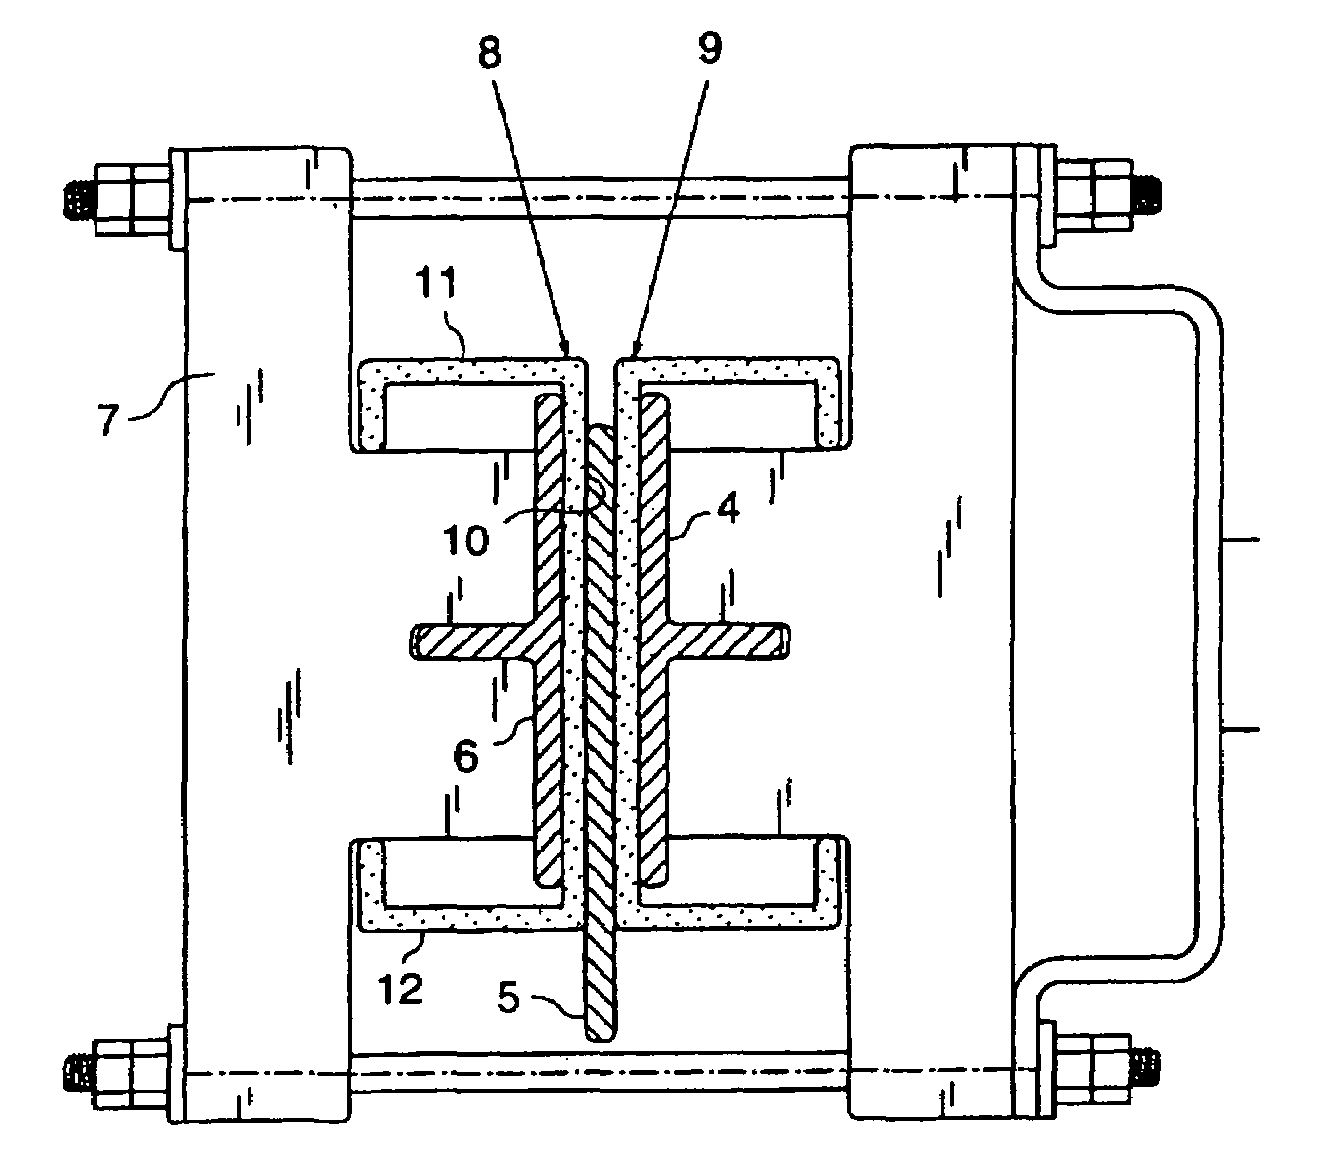 Insulated bus bar assembly in a voltage source converter